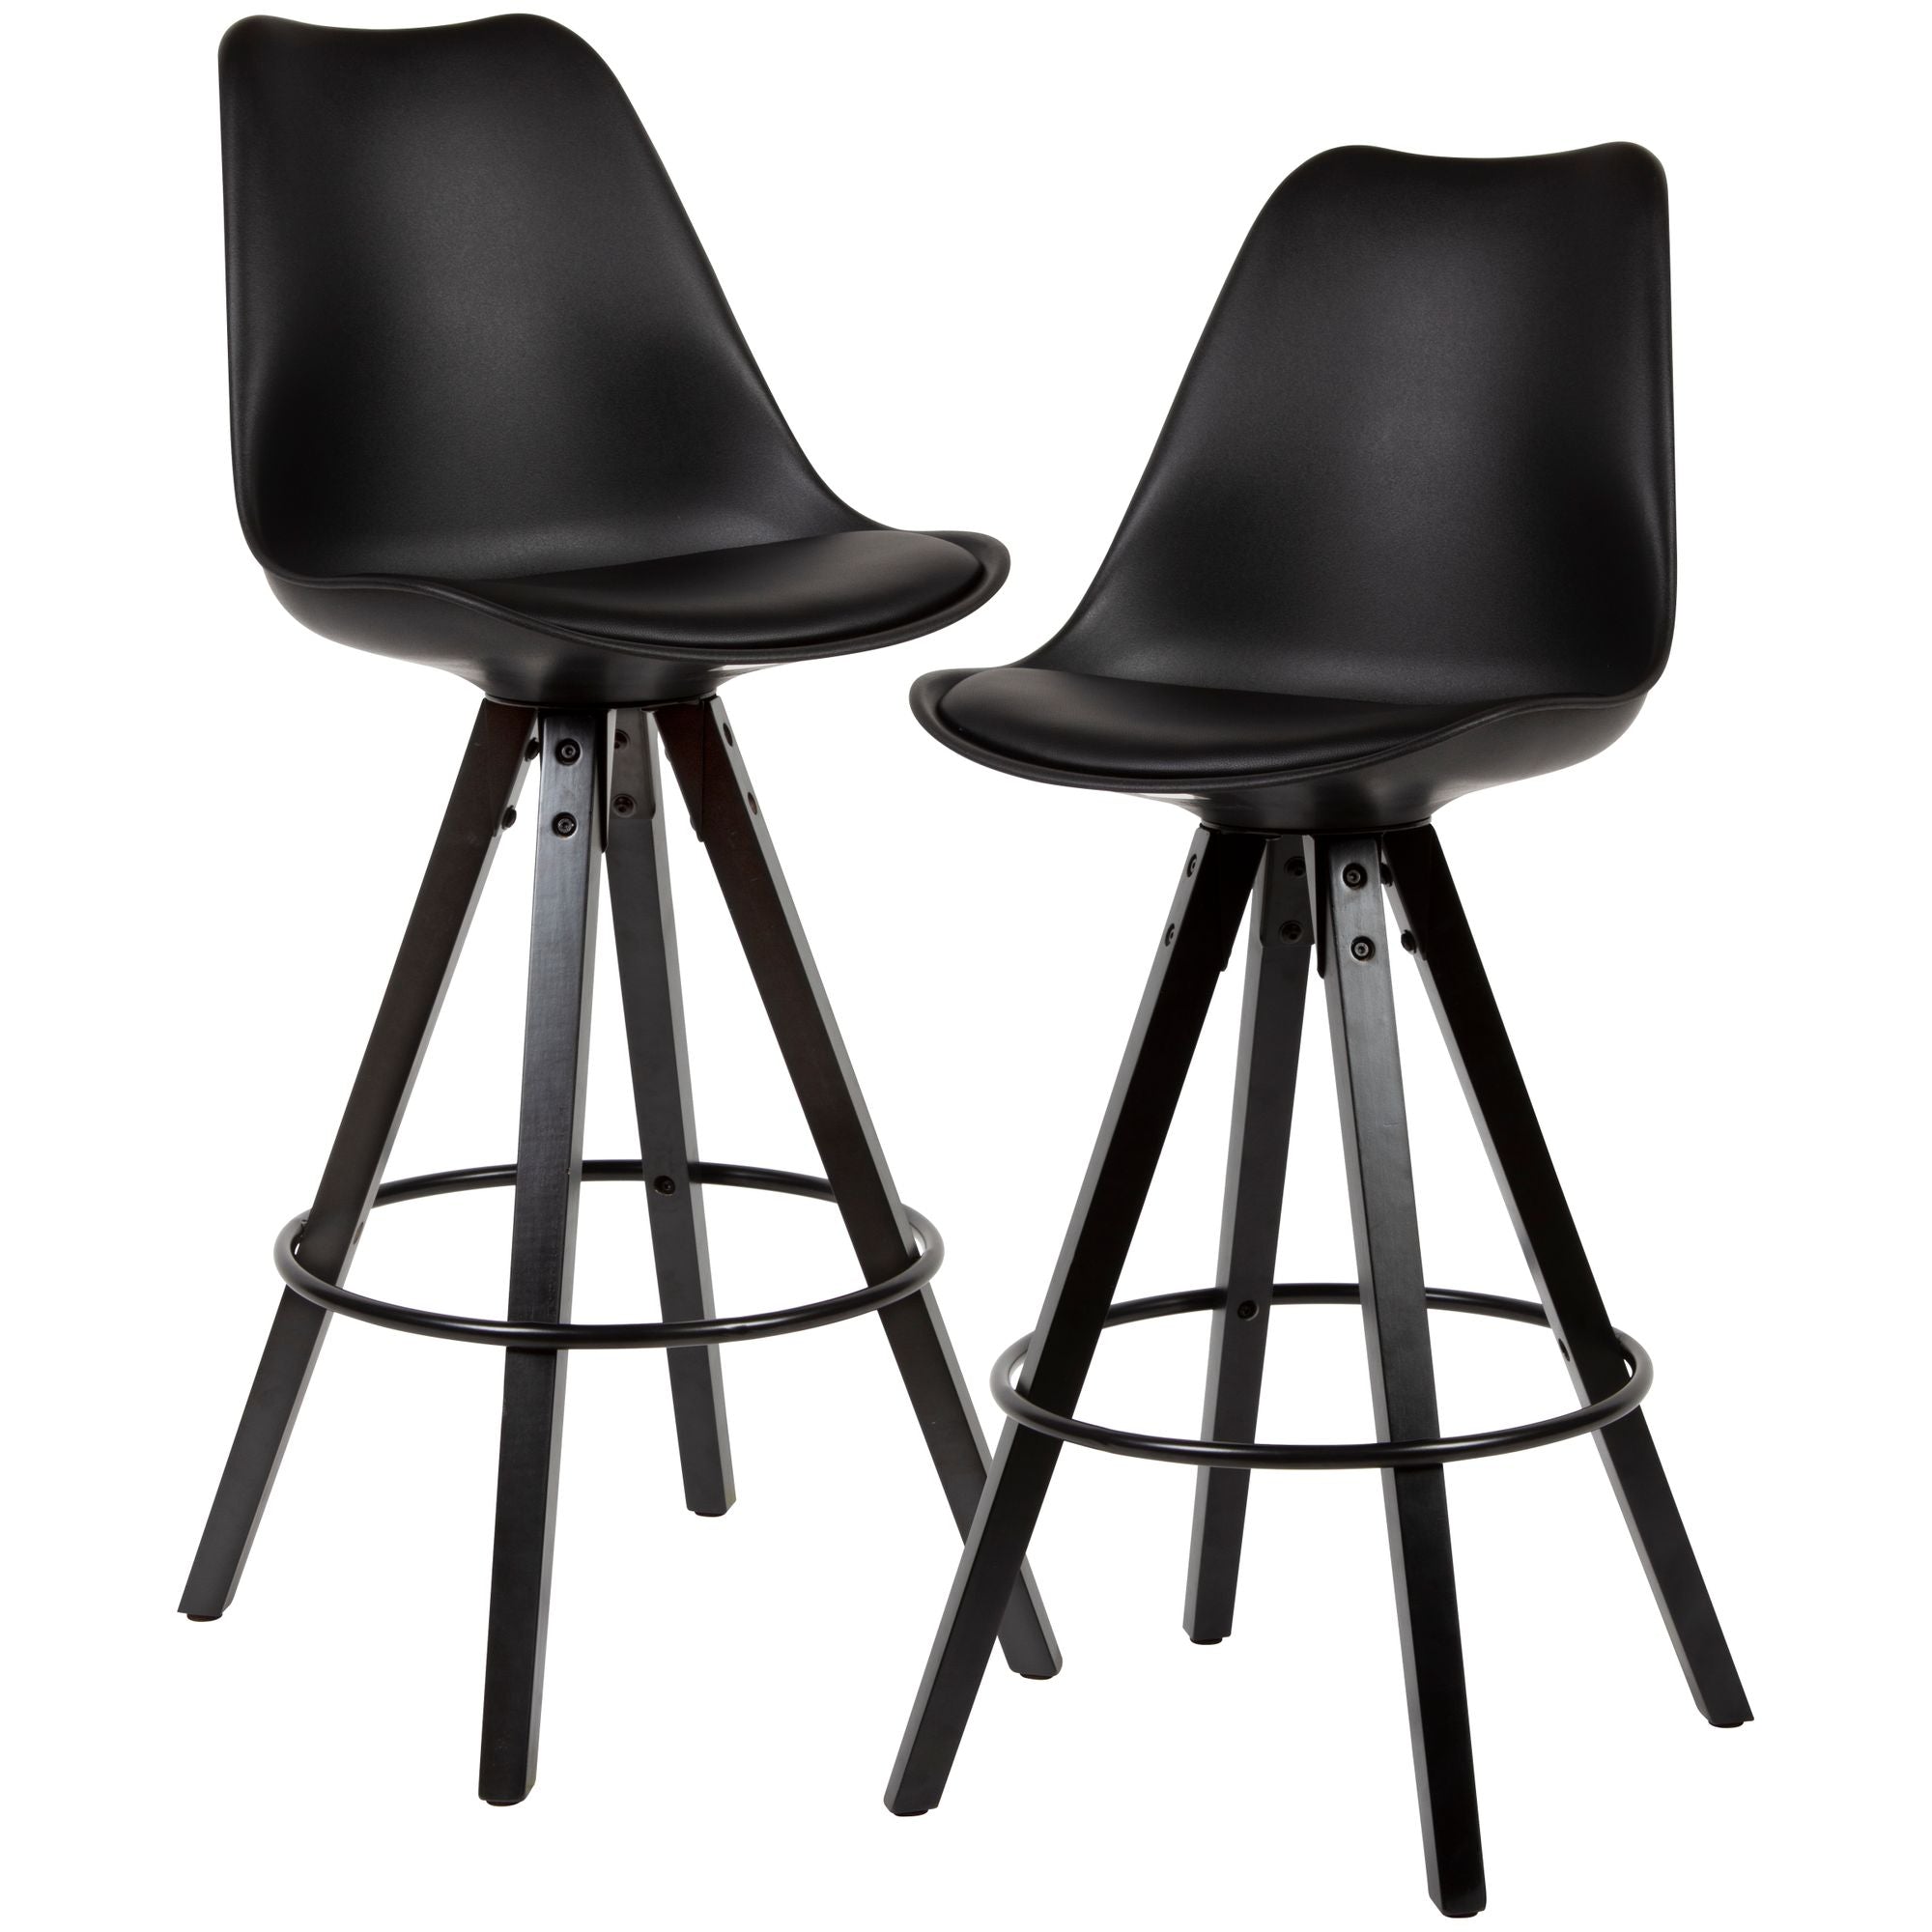 Nancy's Gladeview Bar Stools - Set of 2 - Faux Leather - Backrest - 77cm - Black - Bar Chairs - Stool